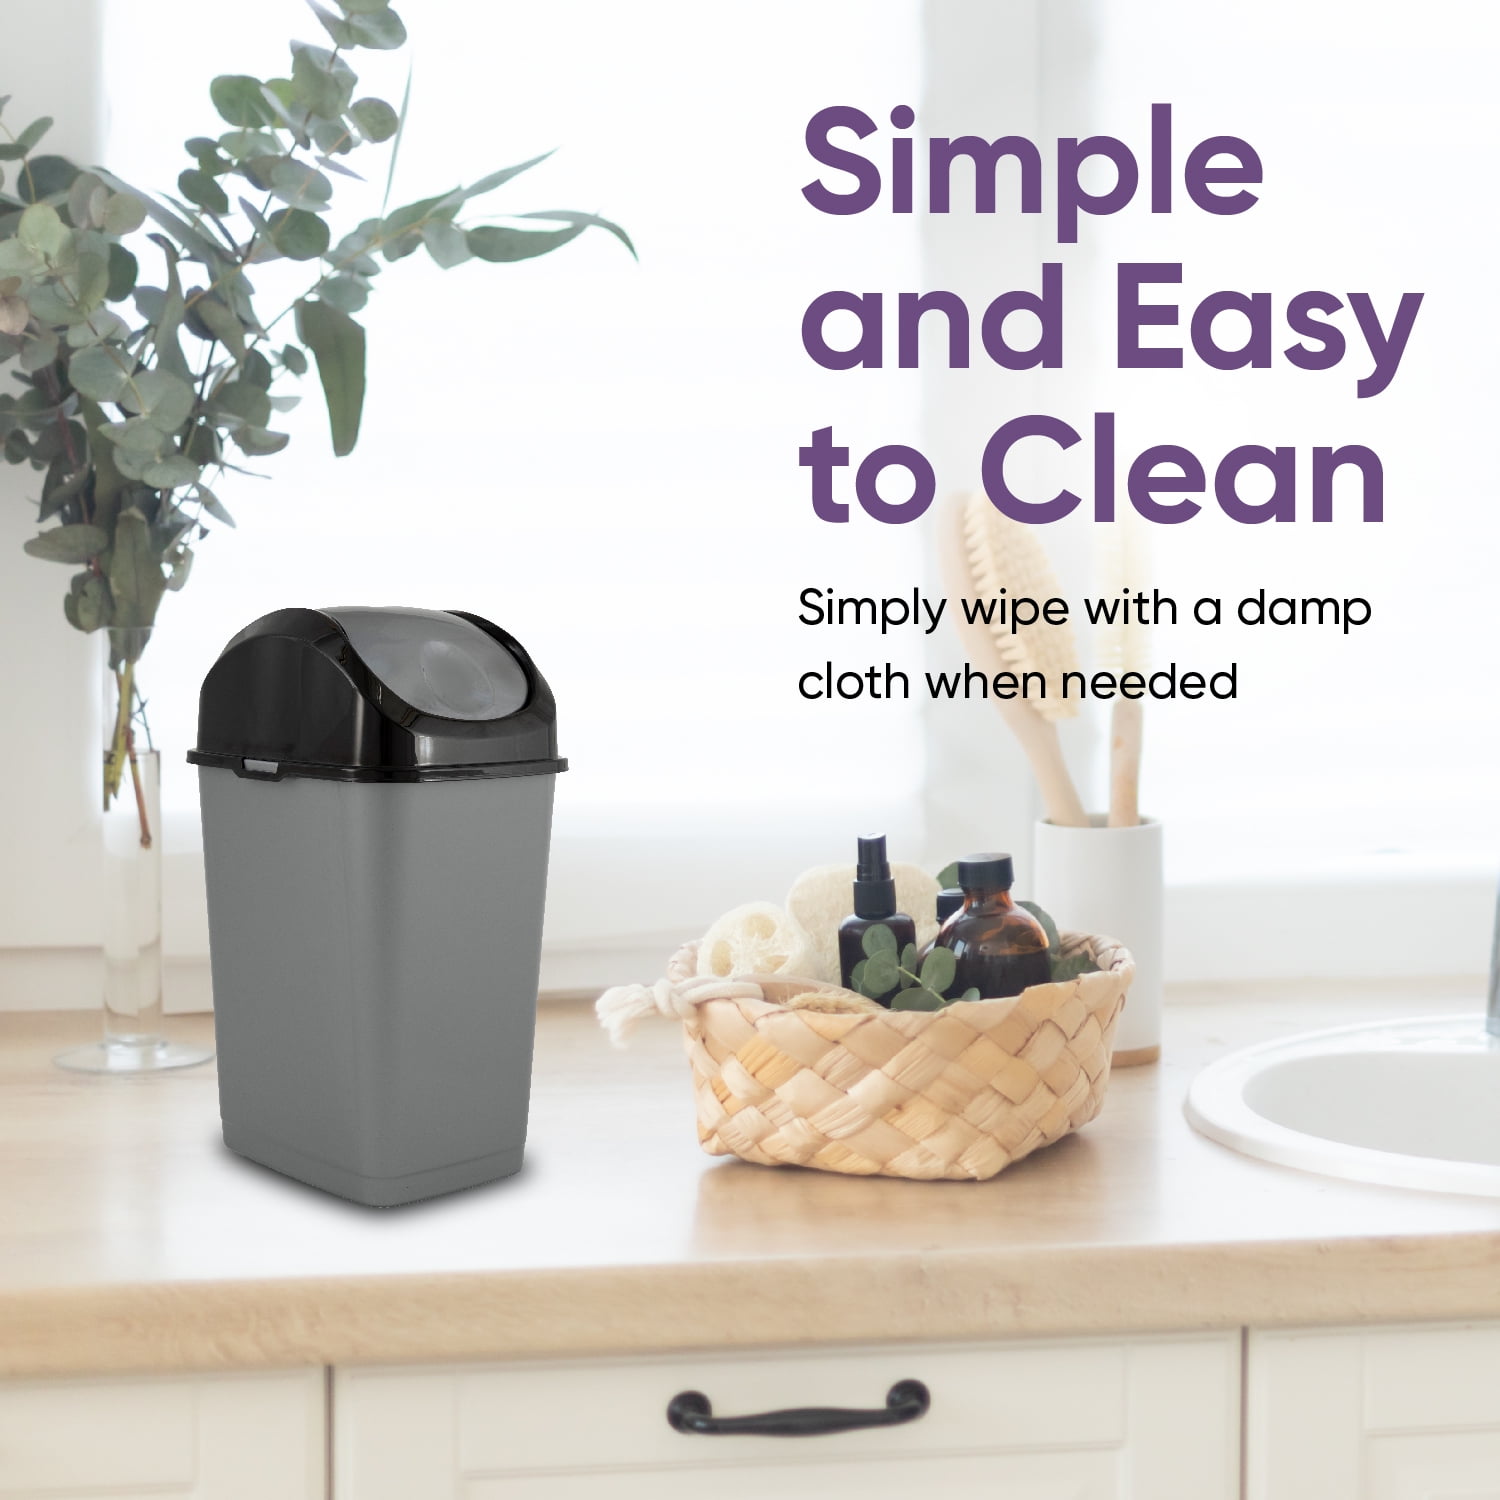 SUBEKYU Small Hanging Kitchen Trash Can, Collapsible Mini Garbage Bin for Cabinet/Car/Bedroom/Bathroom, Plastic, Grey, 2.4 Gallon